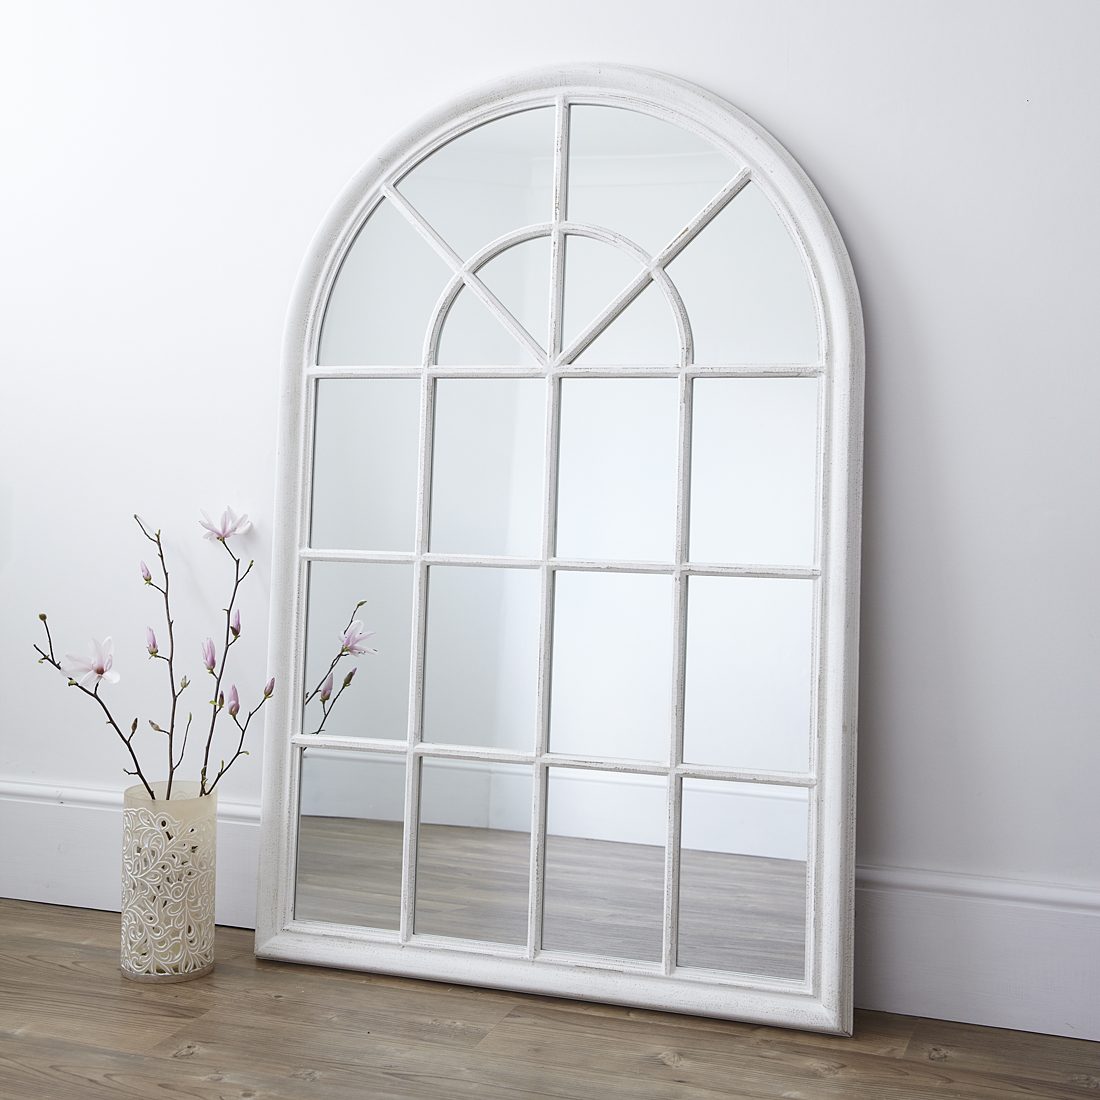 White Arched Window Wall Mirror, Large Window Frame Mirror